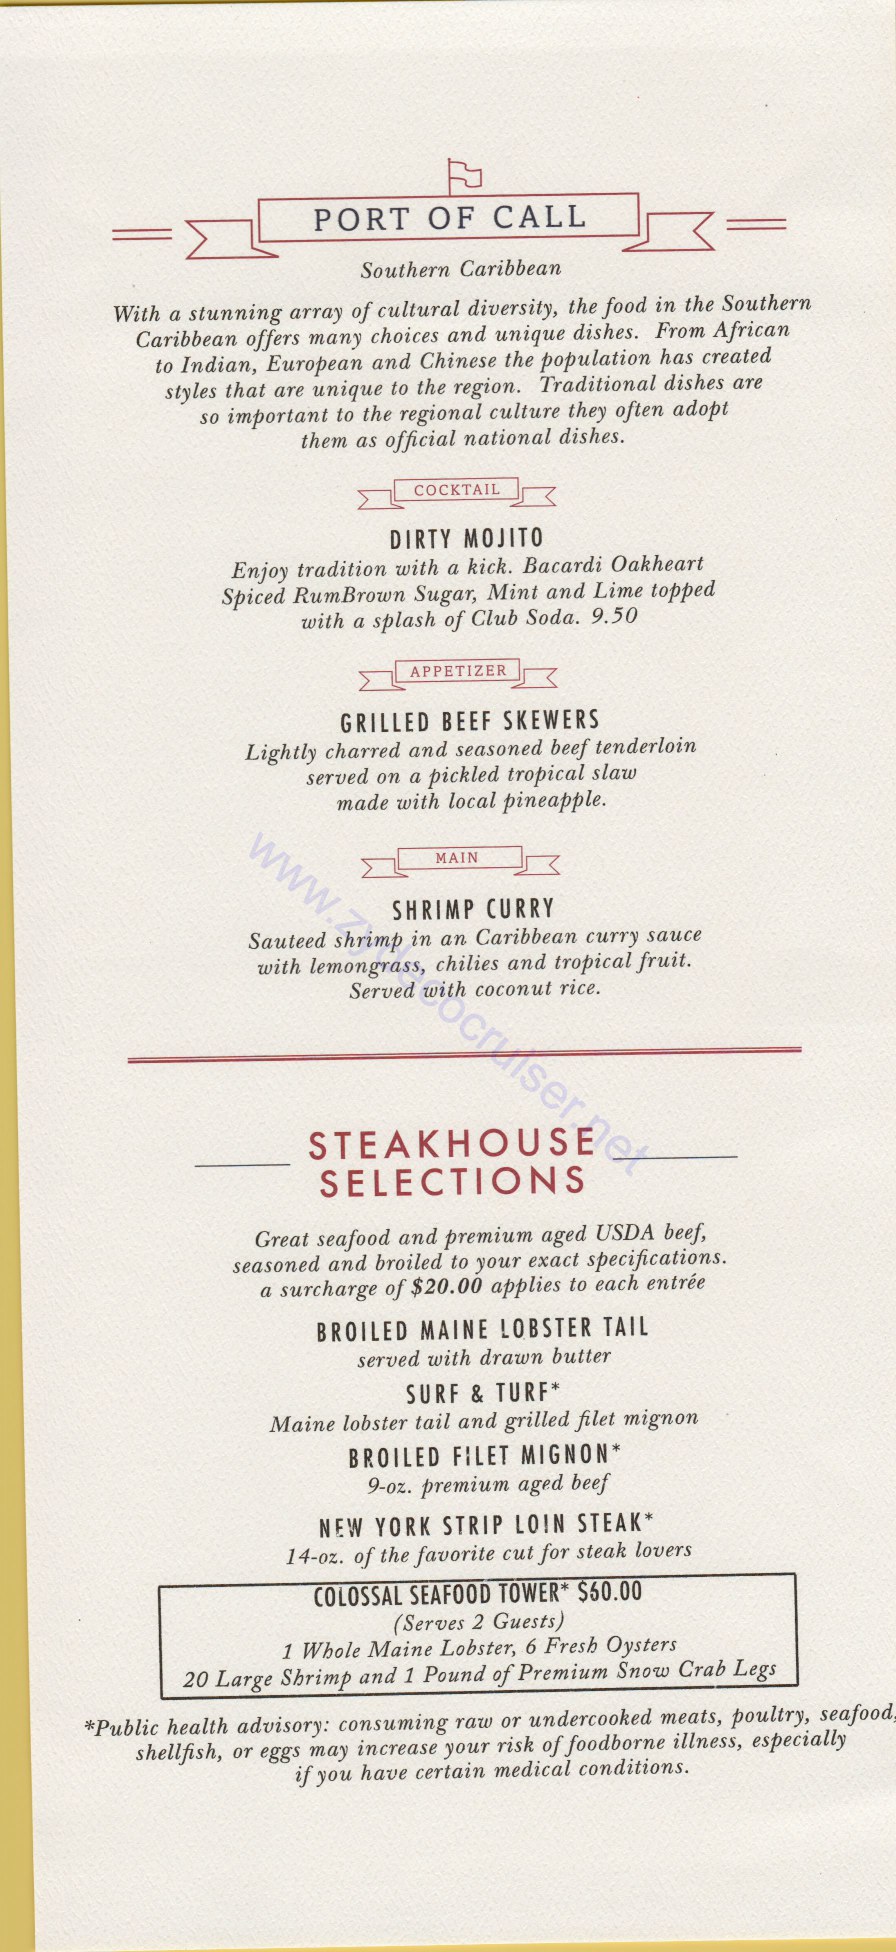 Carnival Horizon Day 12 MDR Dinner Sea Day 7 Port of Call Menu